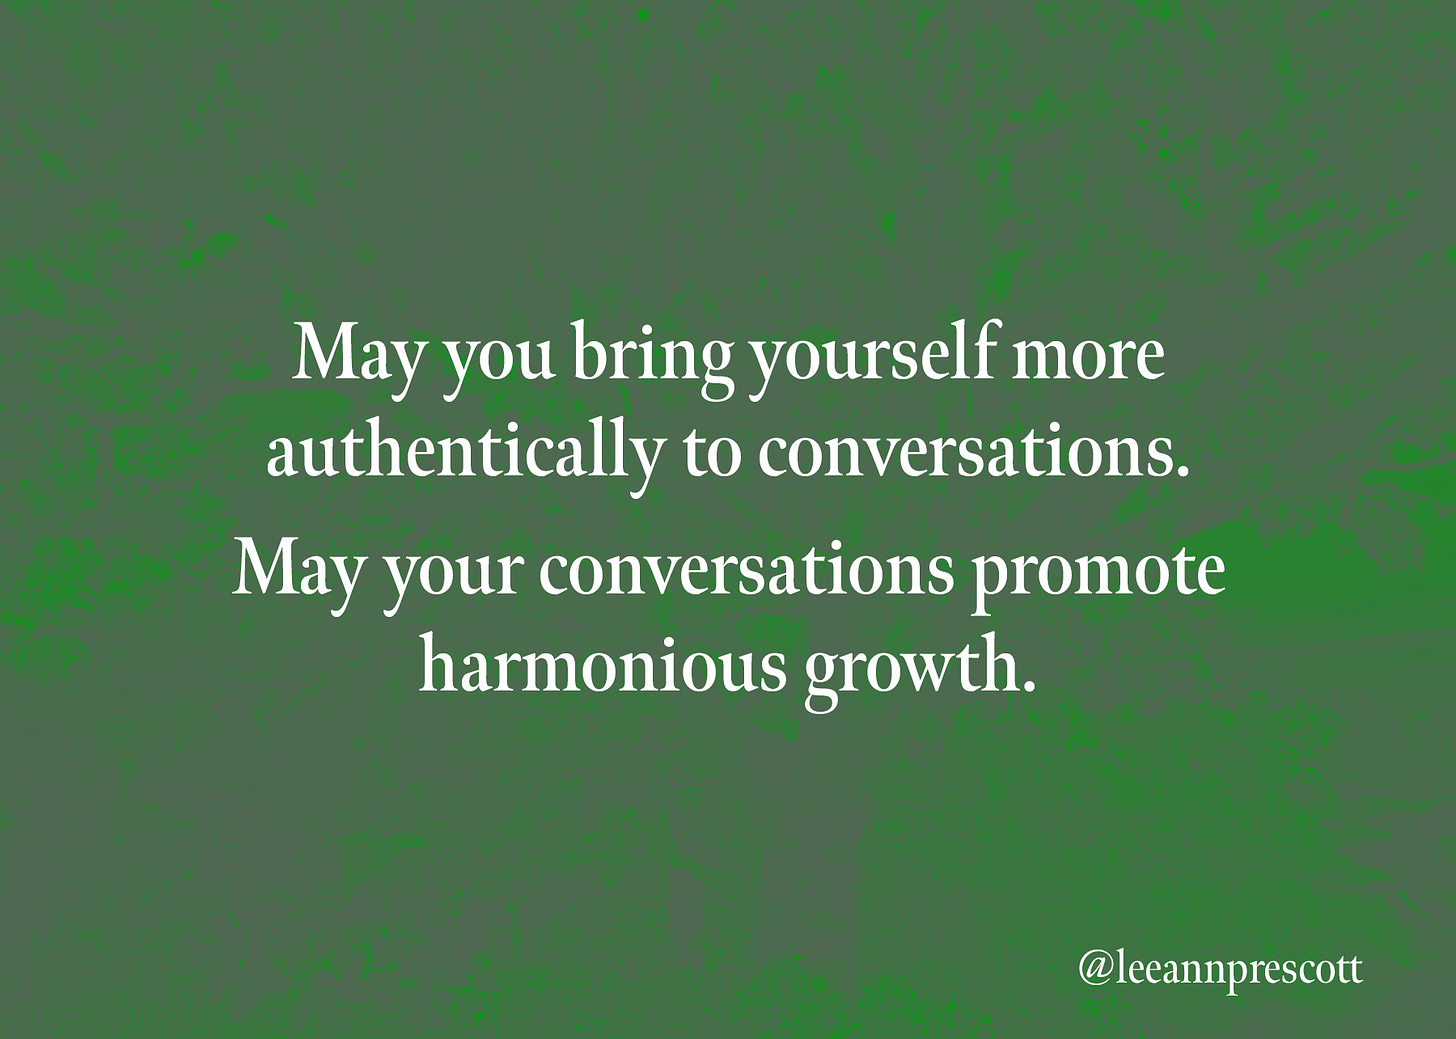 May your conversations support harmonious growth